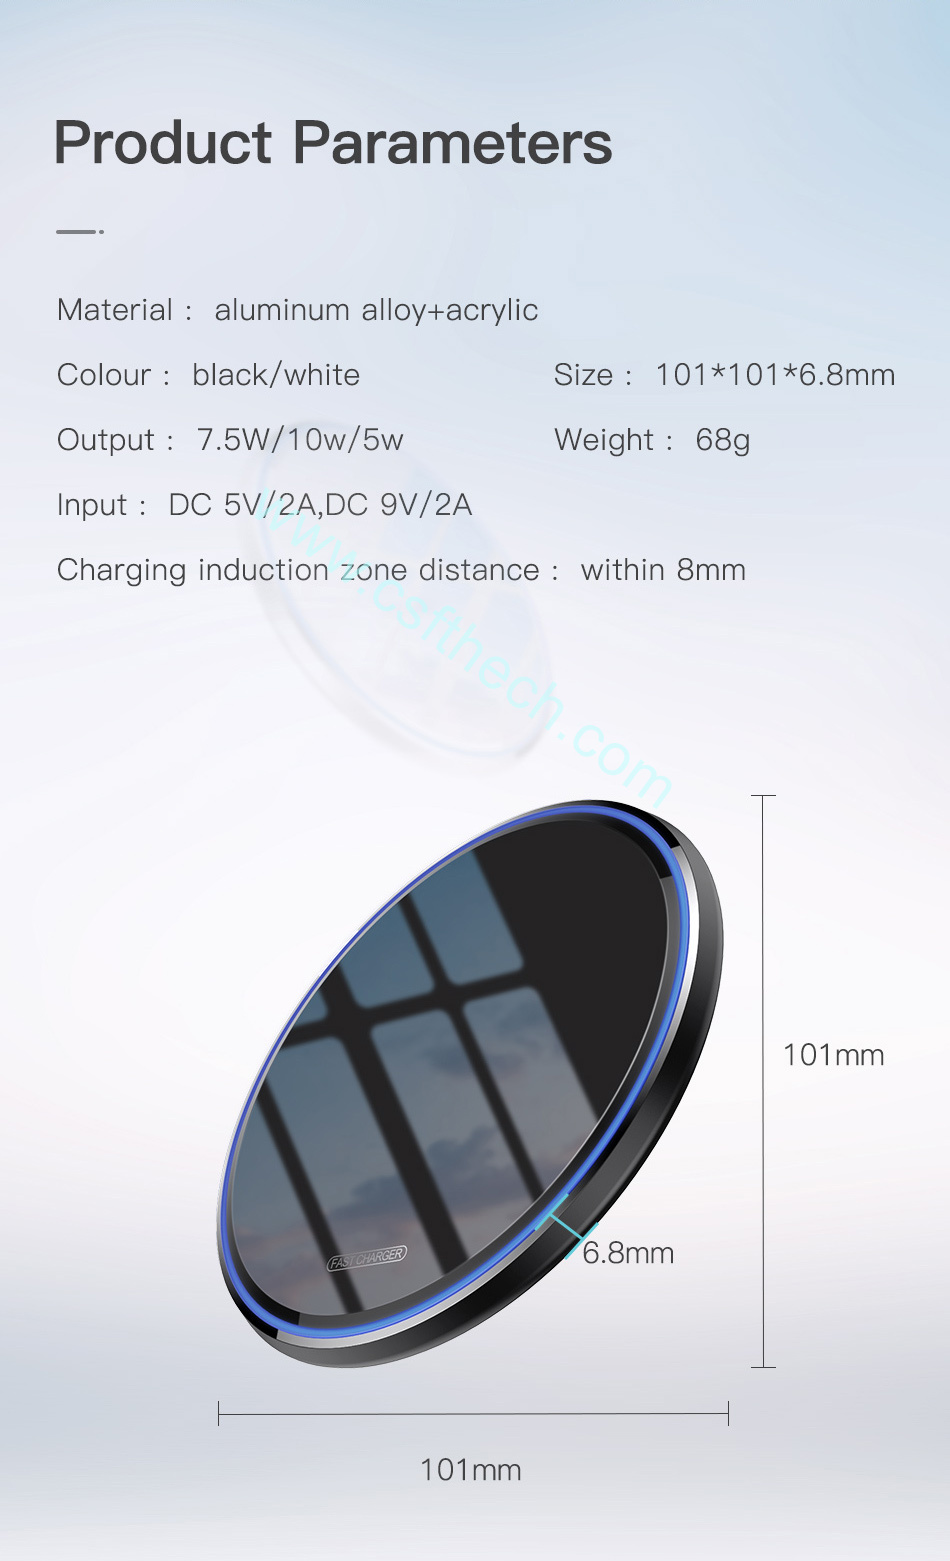  csfhtech  15W Wireless Charger For iPhone X/XS Max XR 8 Plus Mirror Qi Wireless Charging Pad For Samsung S9 S10+ Note 9 8